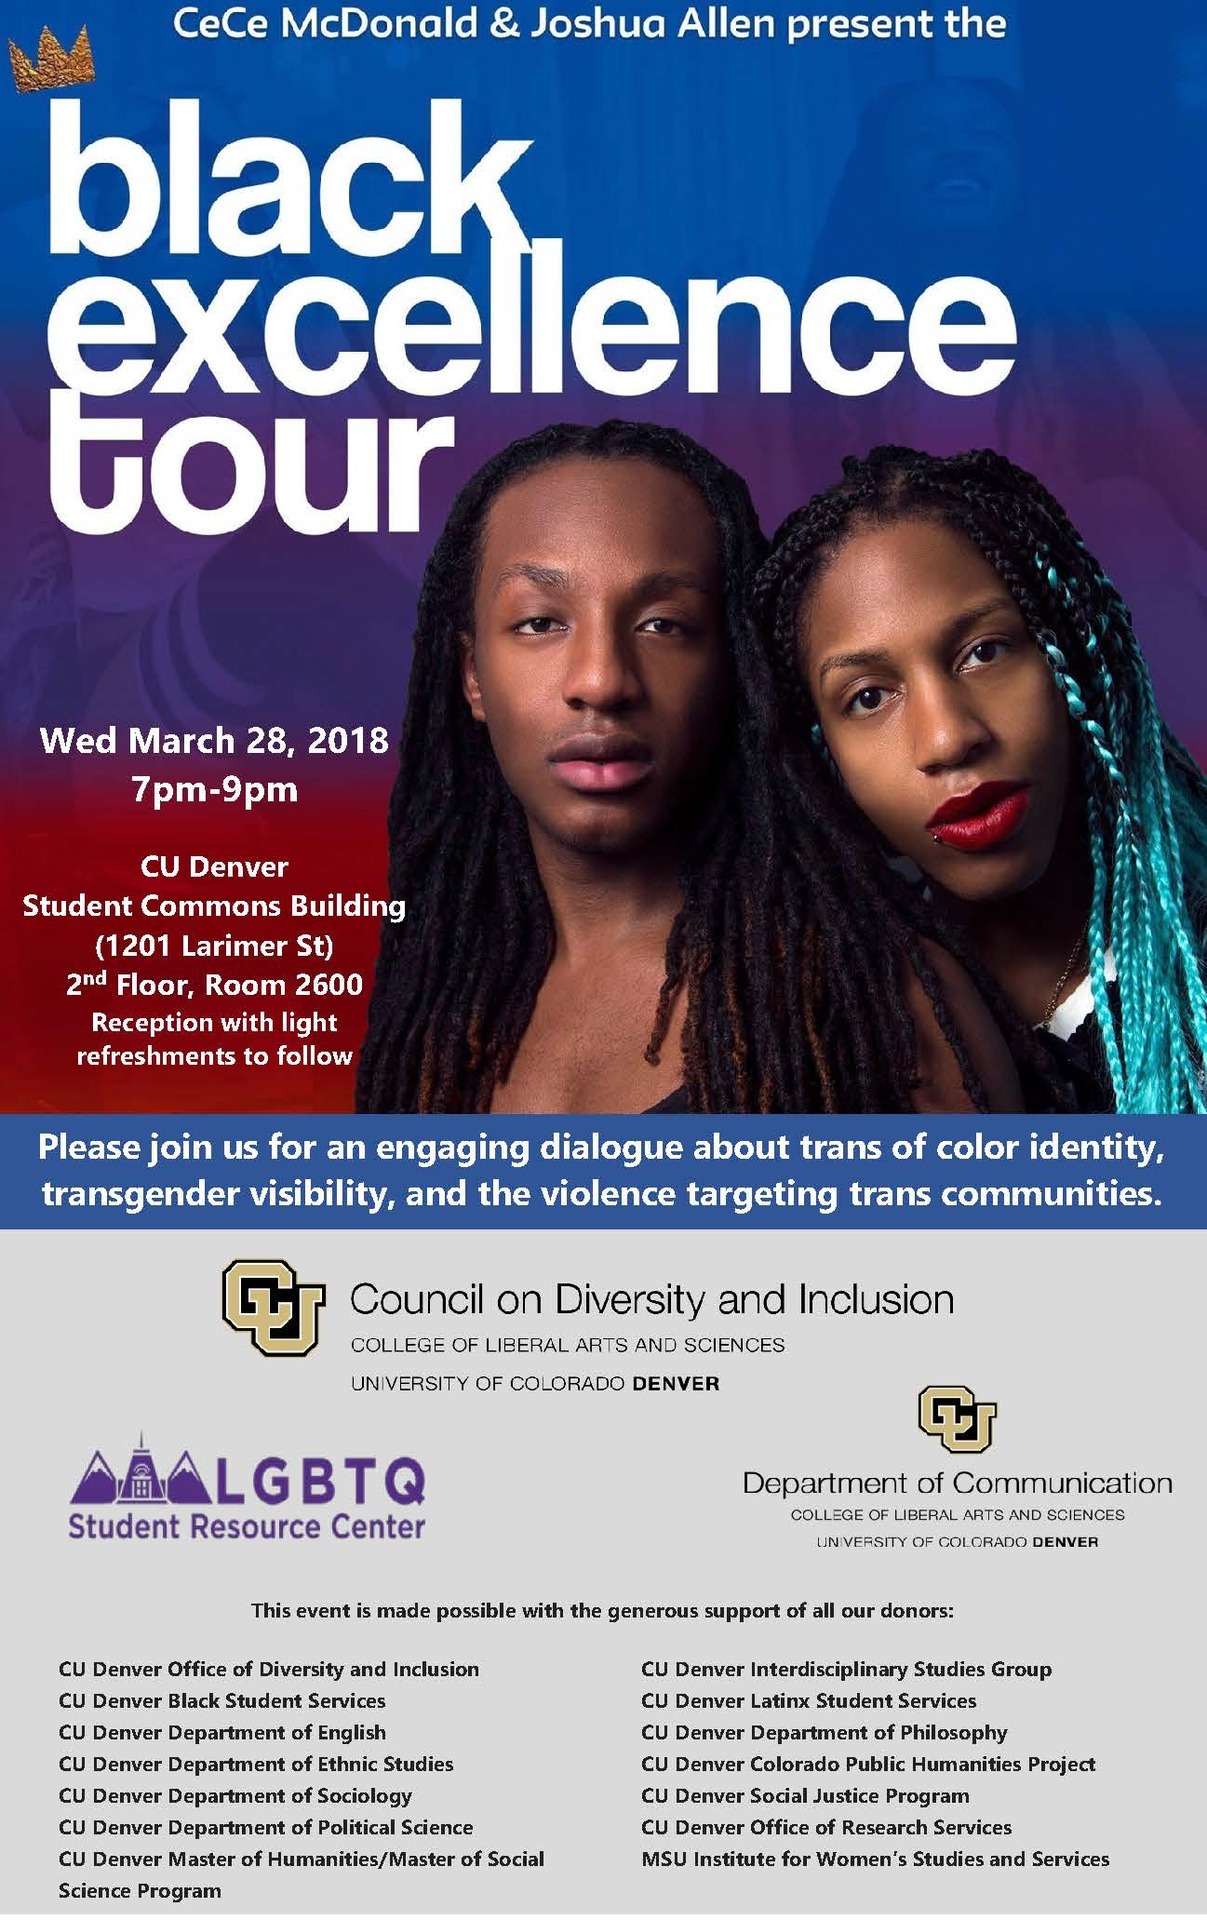 Join us Wednesday, March 28th at CU Denver for a fun, engaging, FREE community event with CeCe McDonald and Joshua Allen, both trans artists of color and prison abolition activists.
A lively community discussion will followed by a short Q&A, and a...